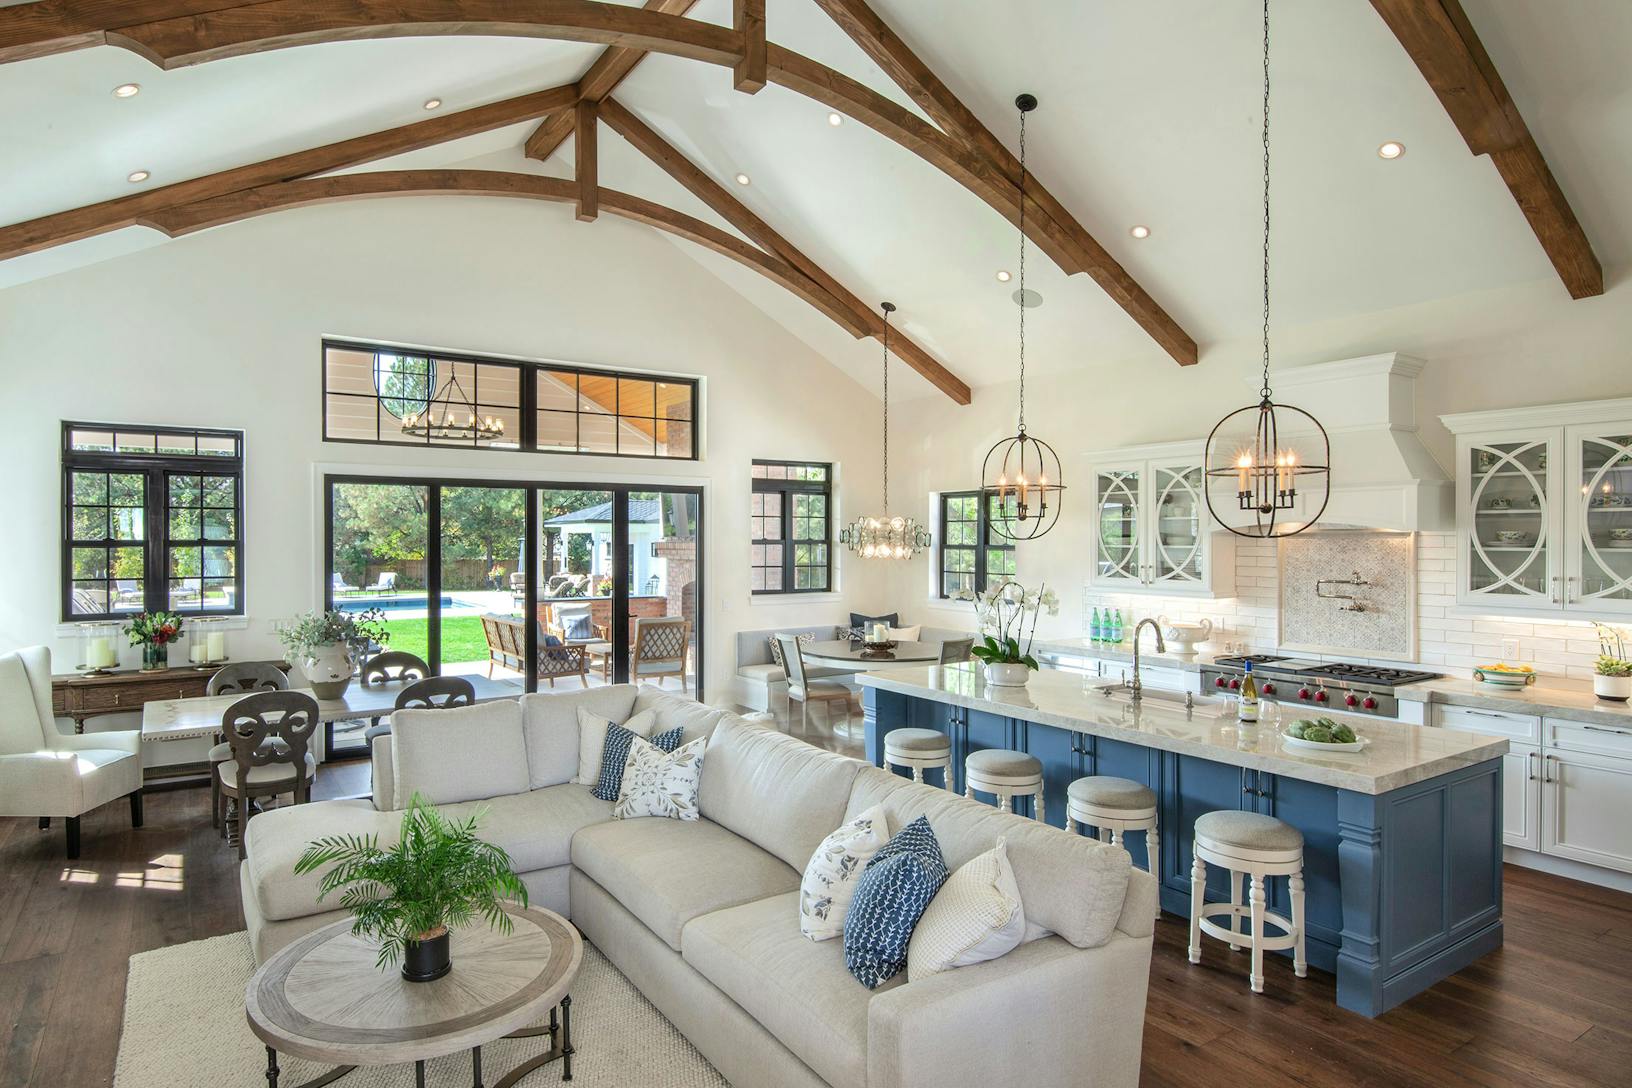 A large open kitchen and living room with folding glass walls, wood beams